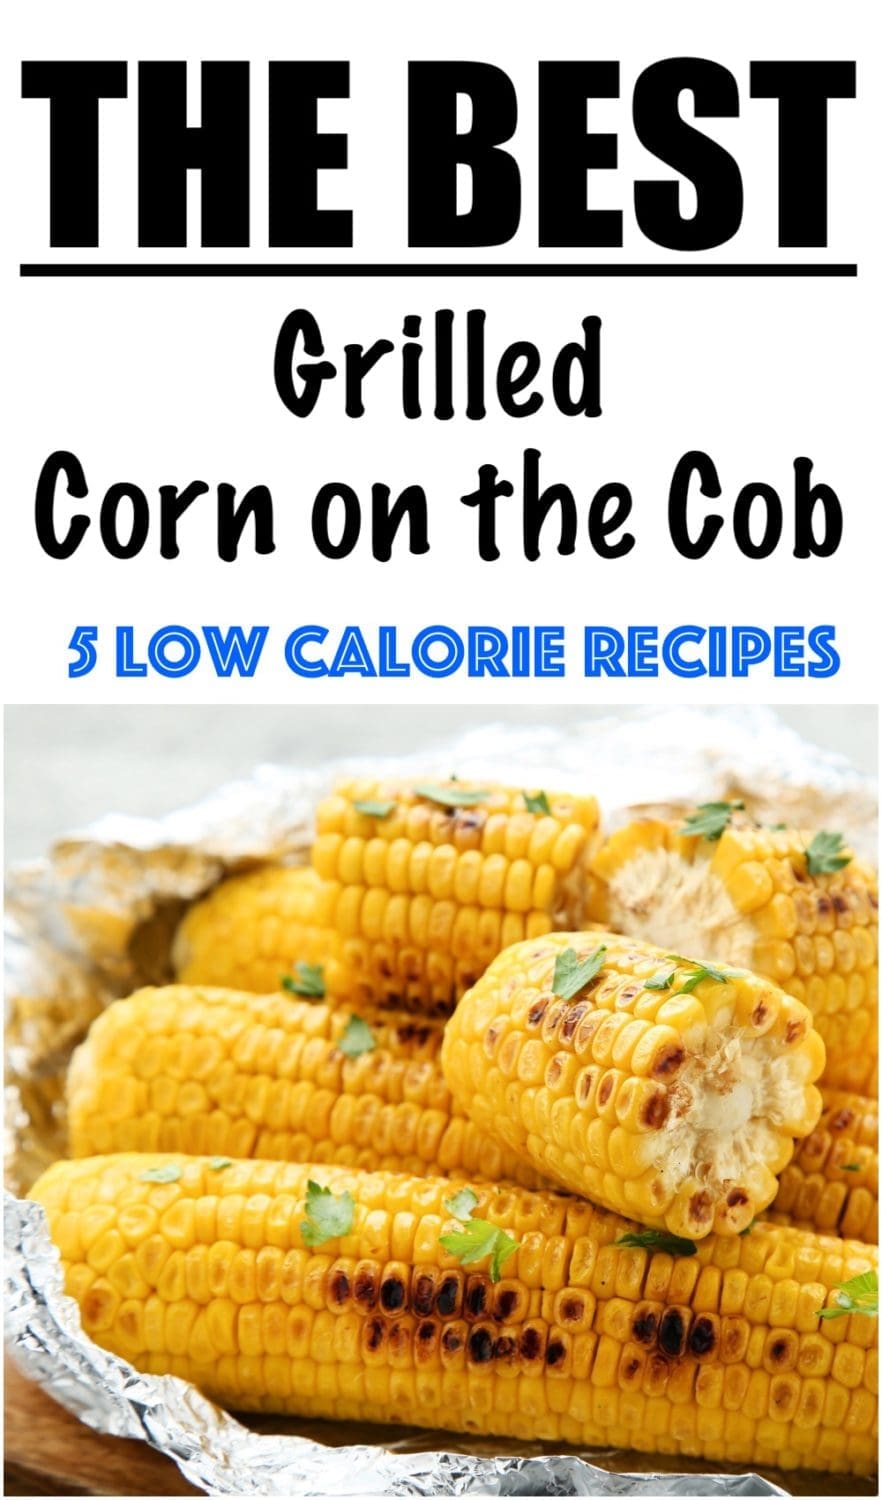 Grilled Corn on the Cob in Foil